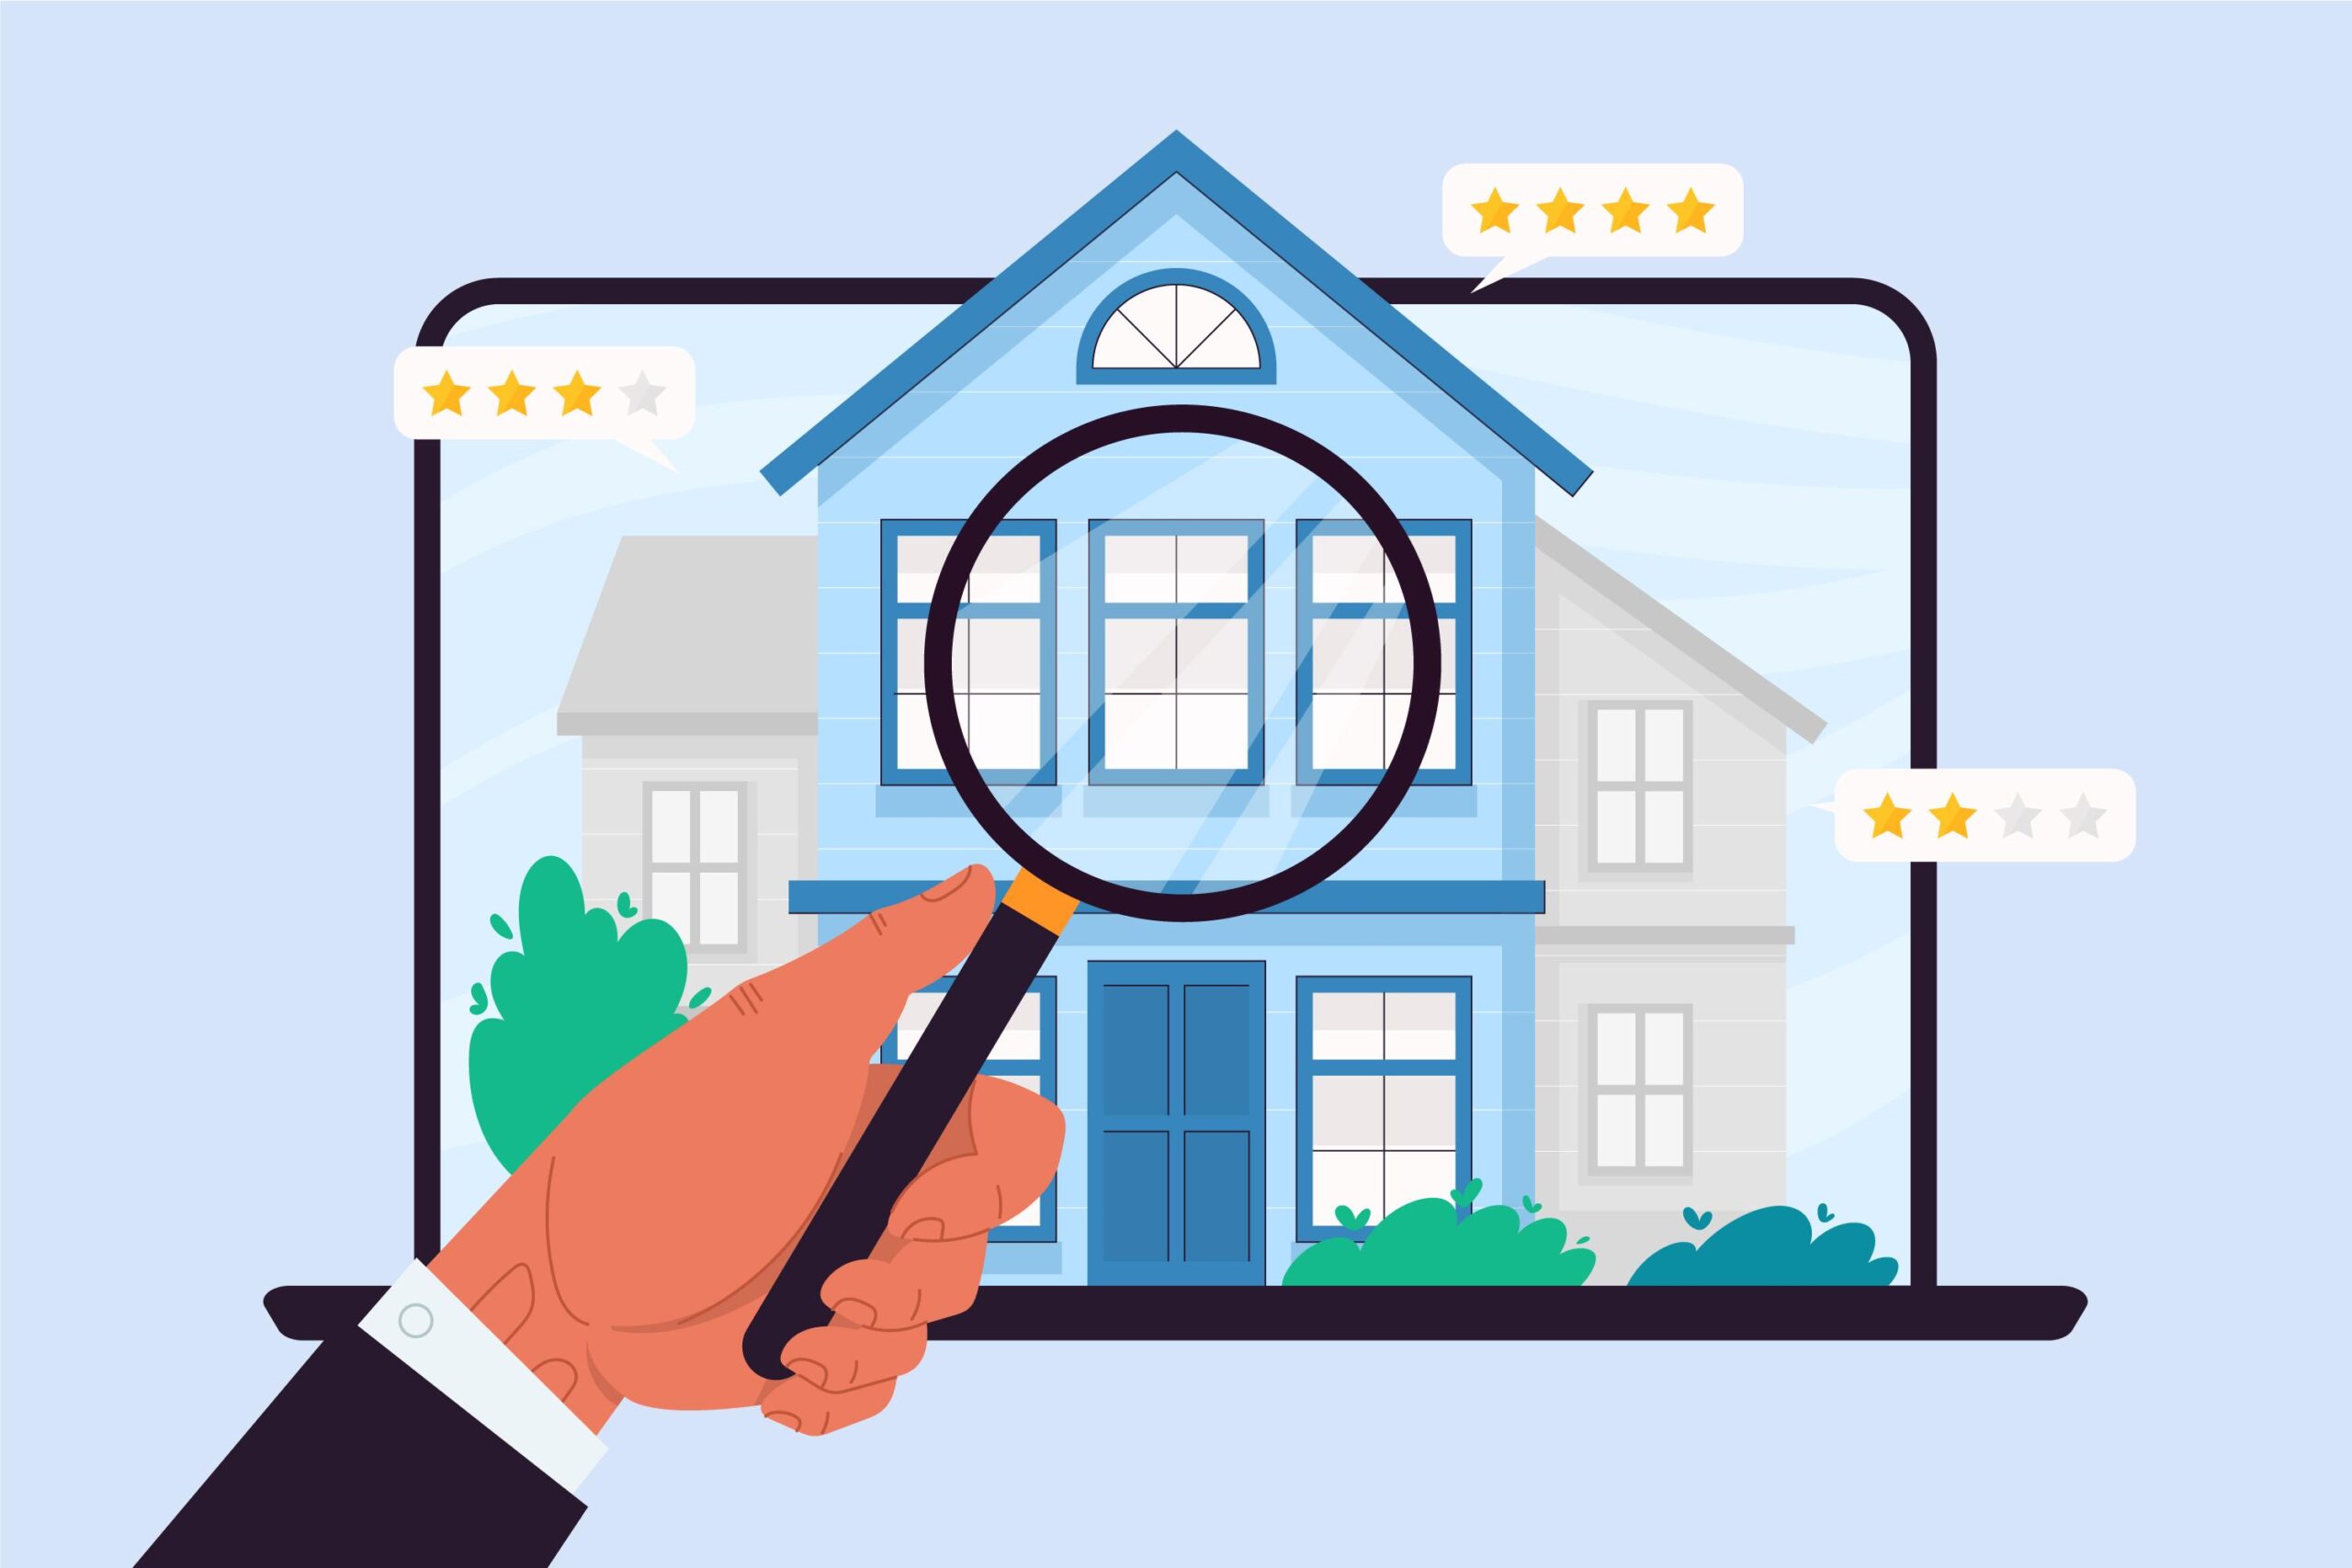 residential home inspection